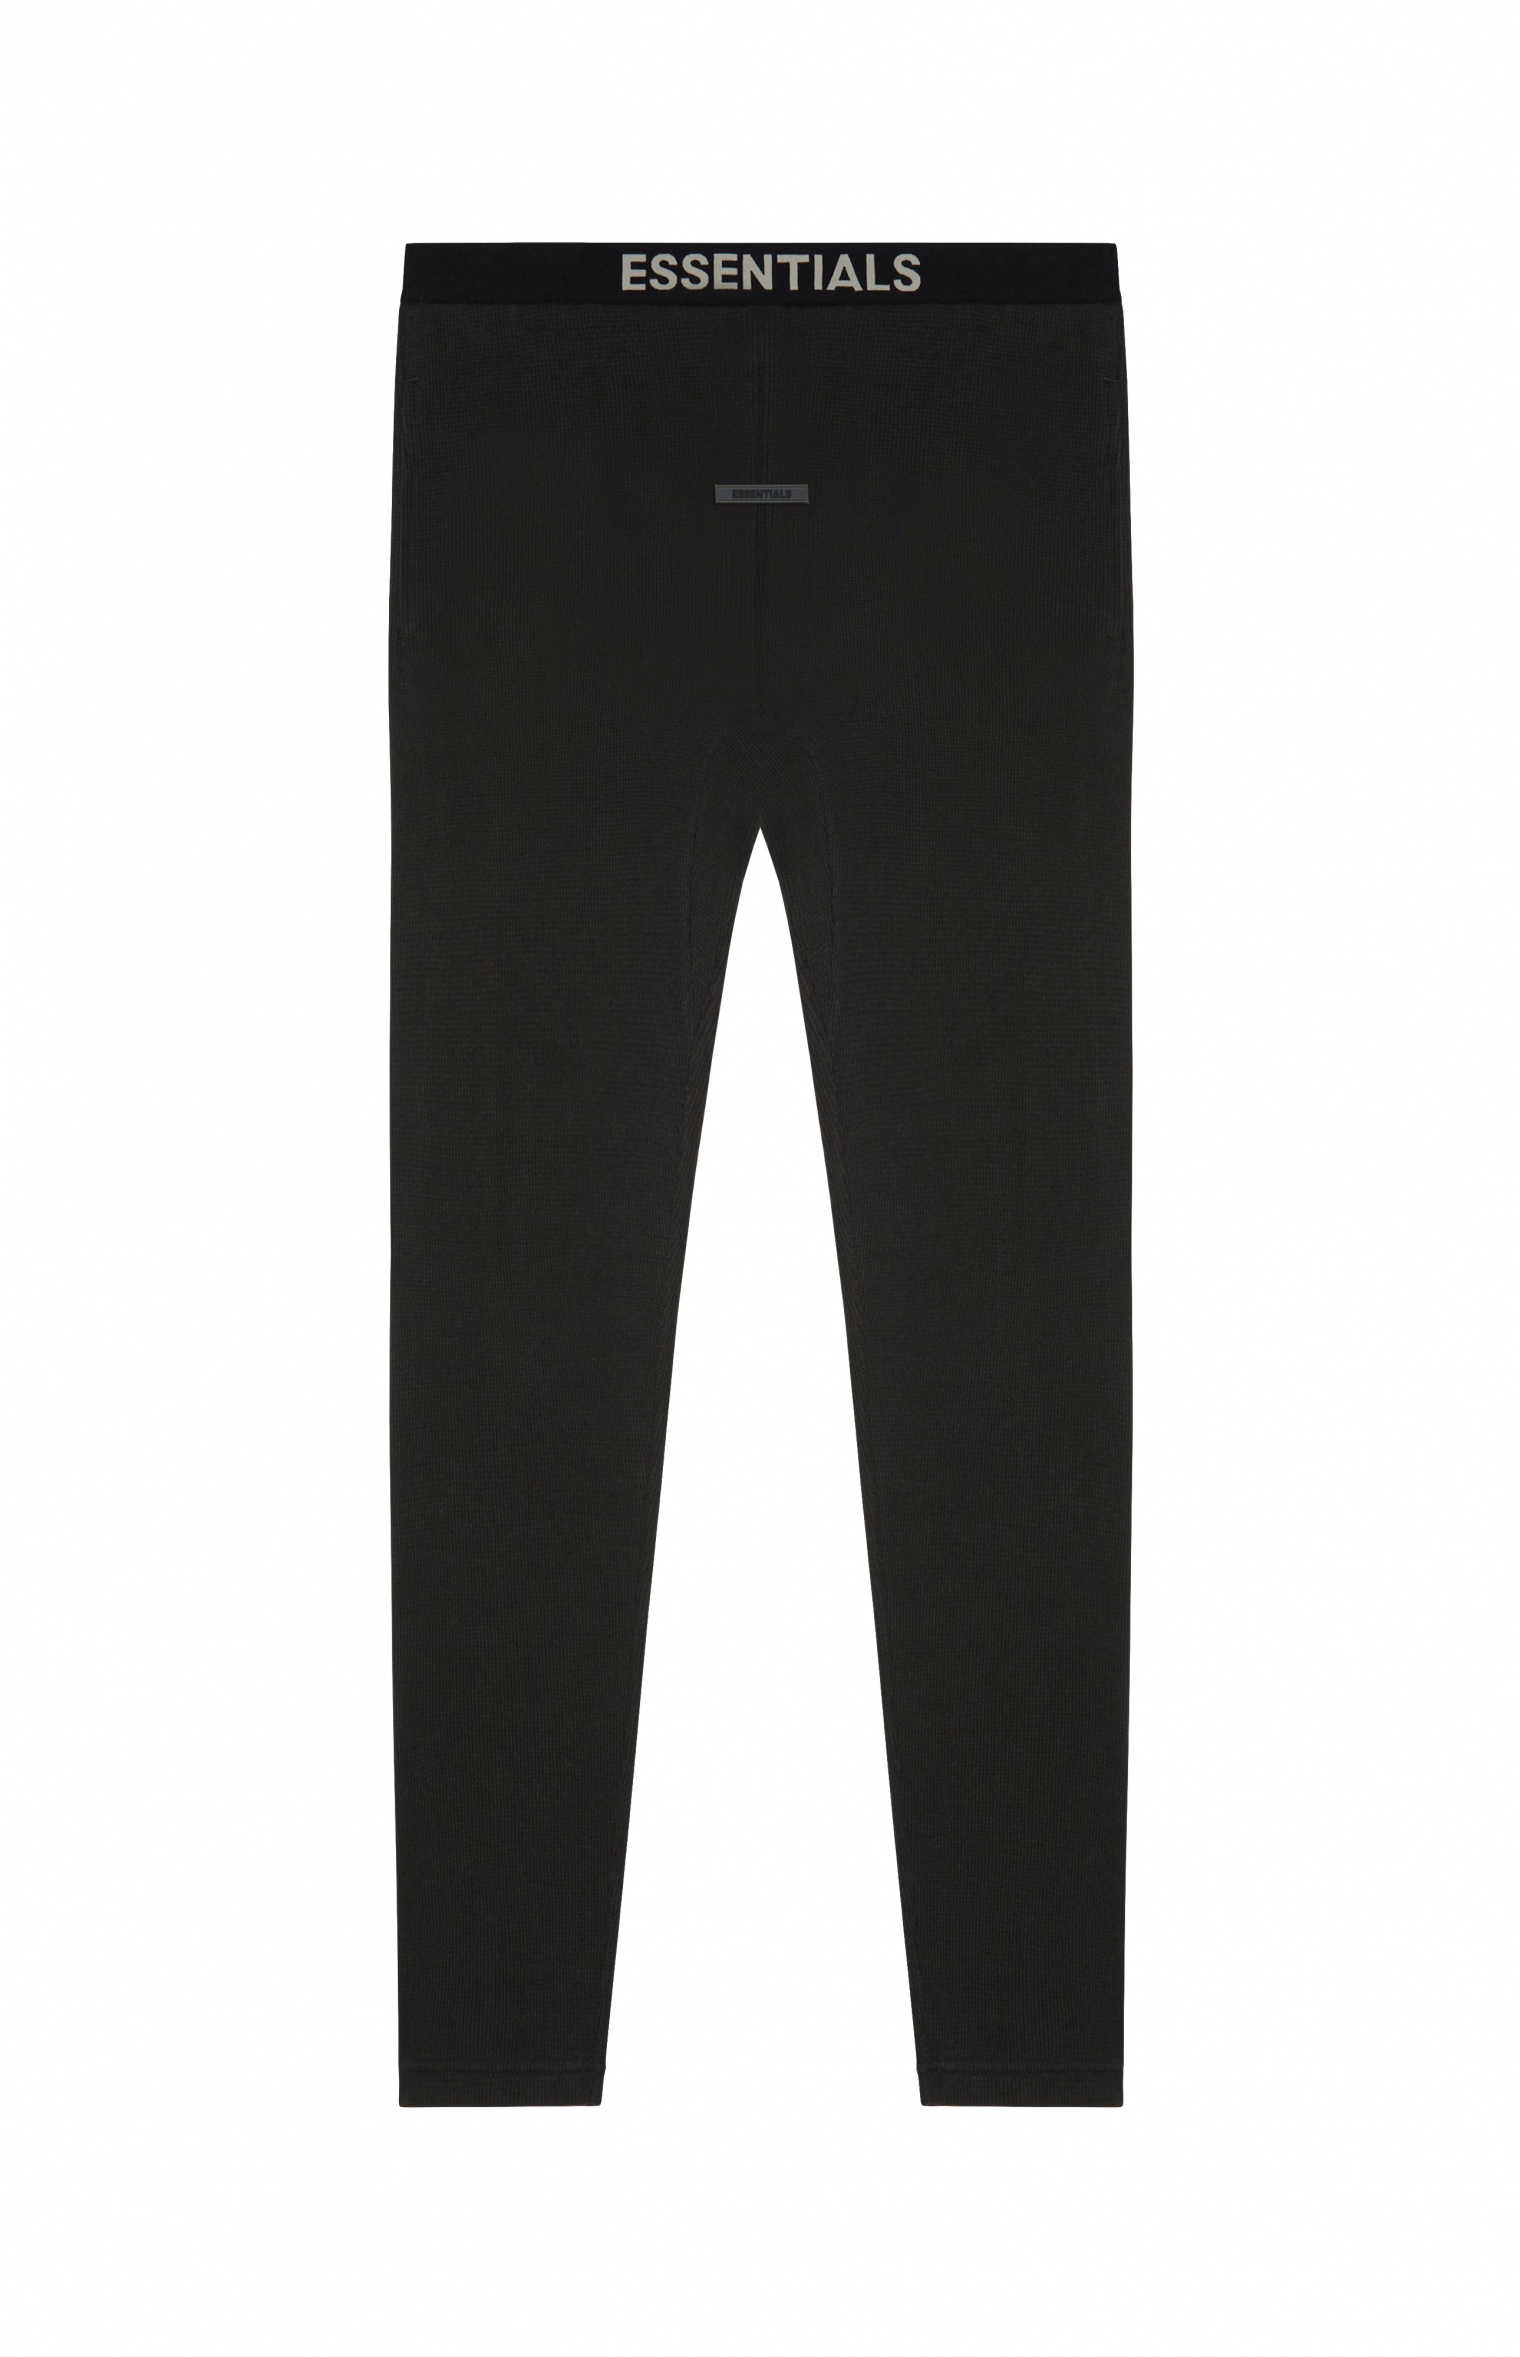 Fear of God Essentials Trousers